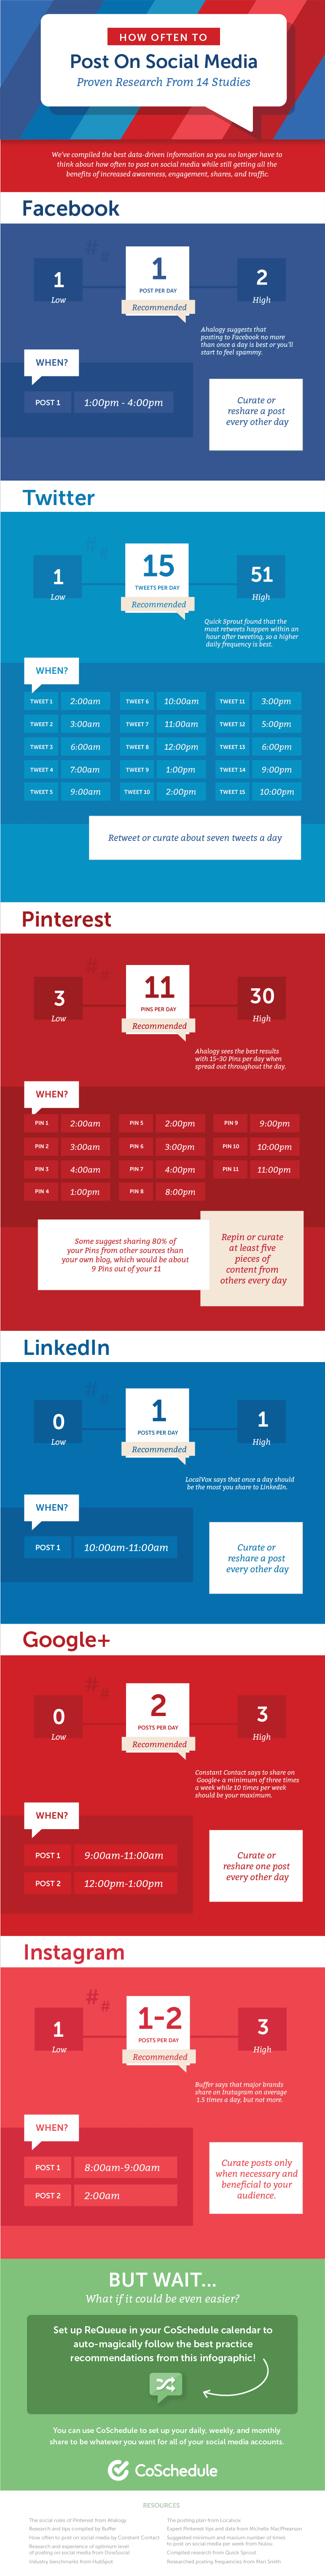 Infographic on how often to post on social media